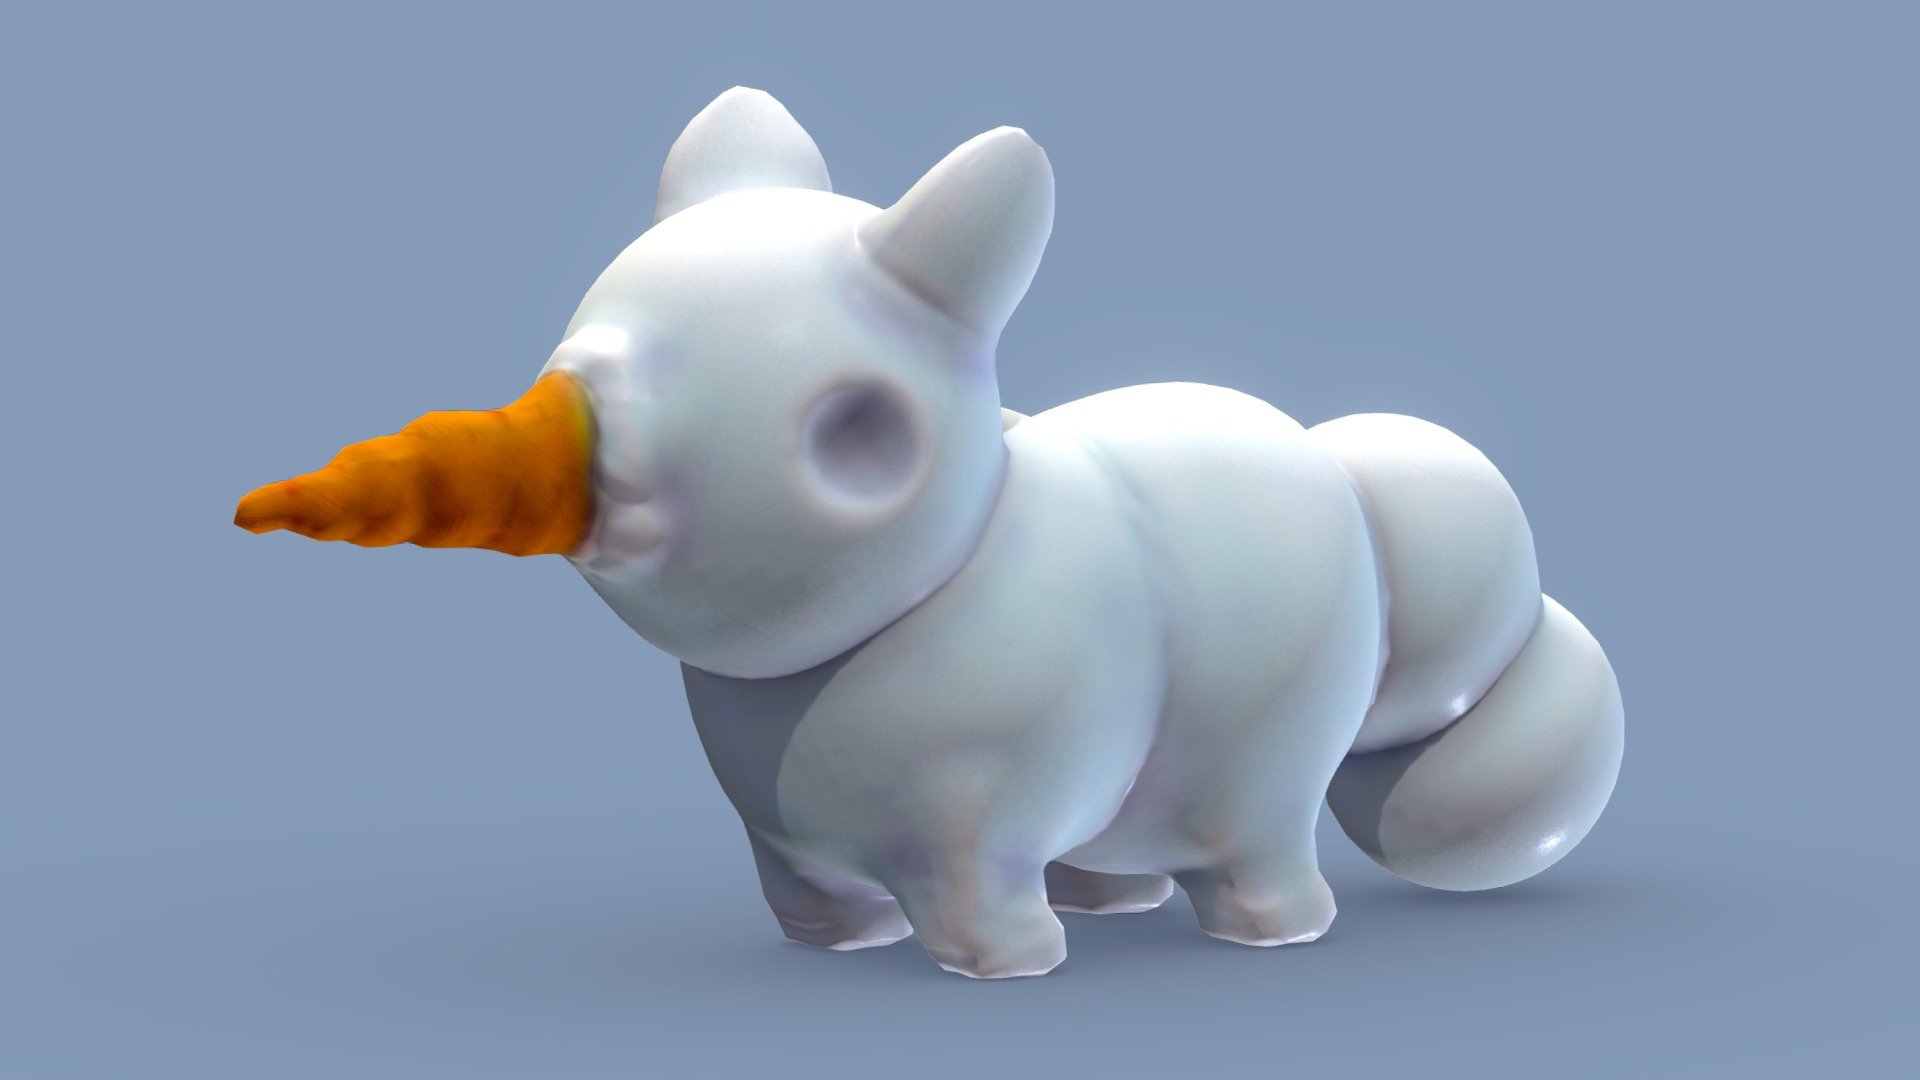 Lowpoly version of Snowball with image textures for realtime use 3d model